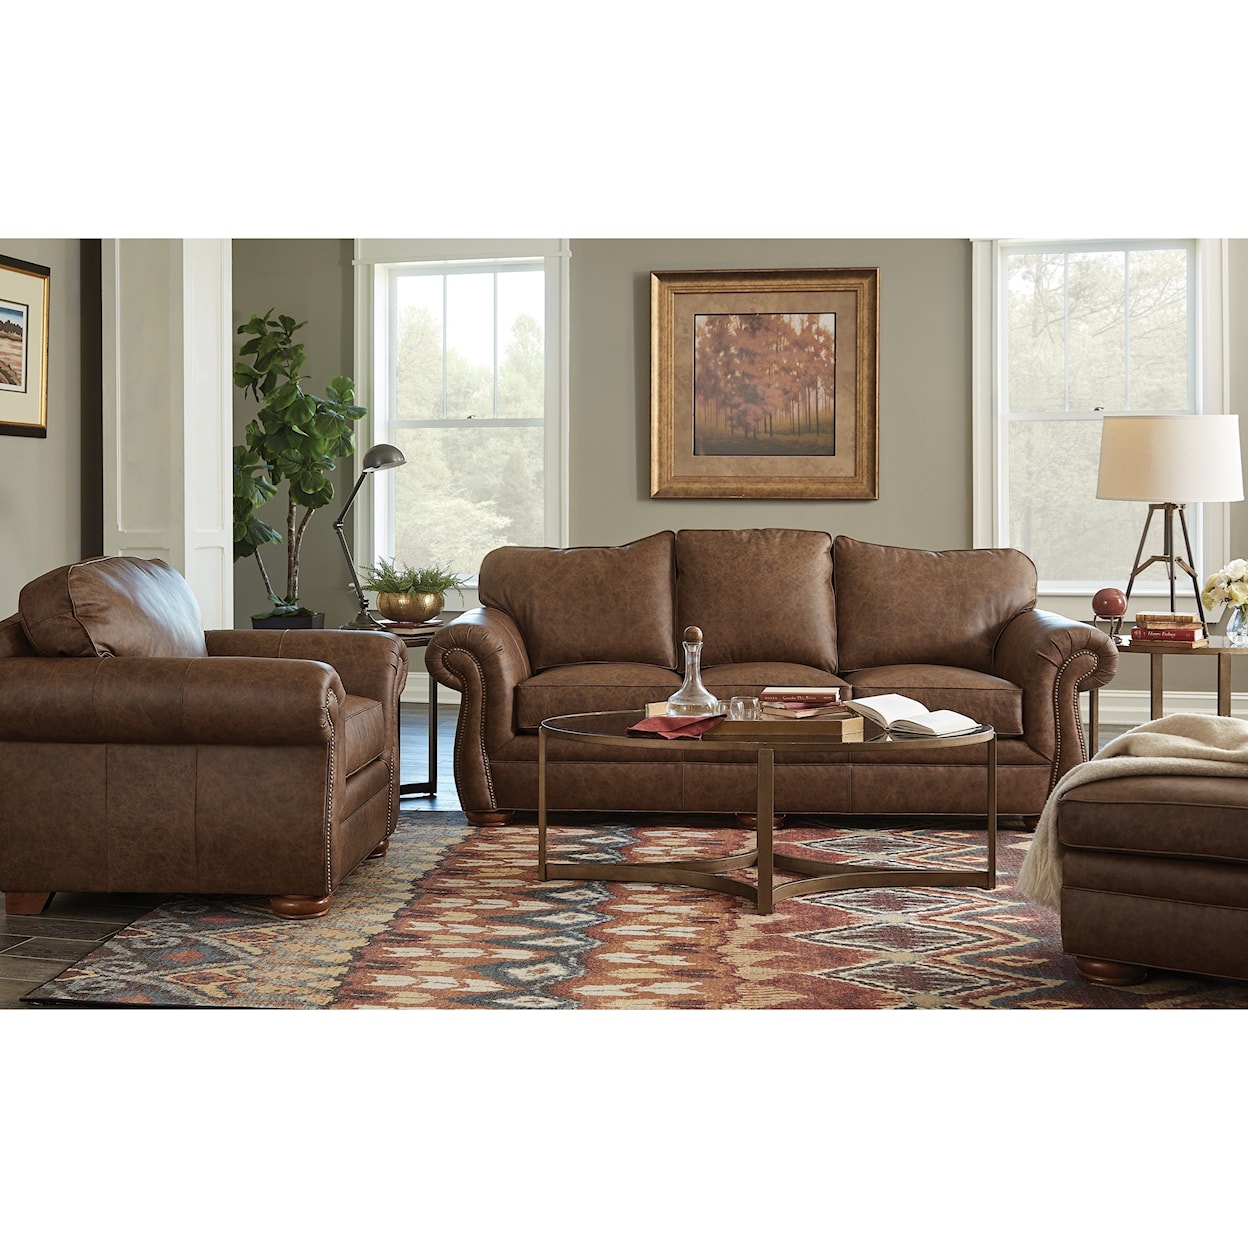 Craftmaster L268550 Living Room Group